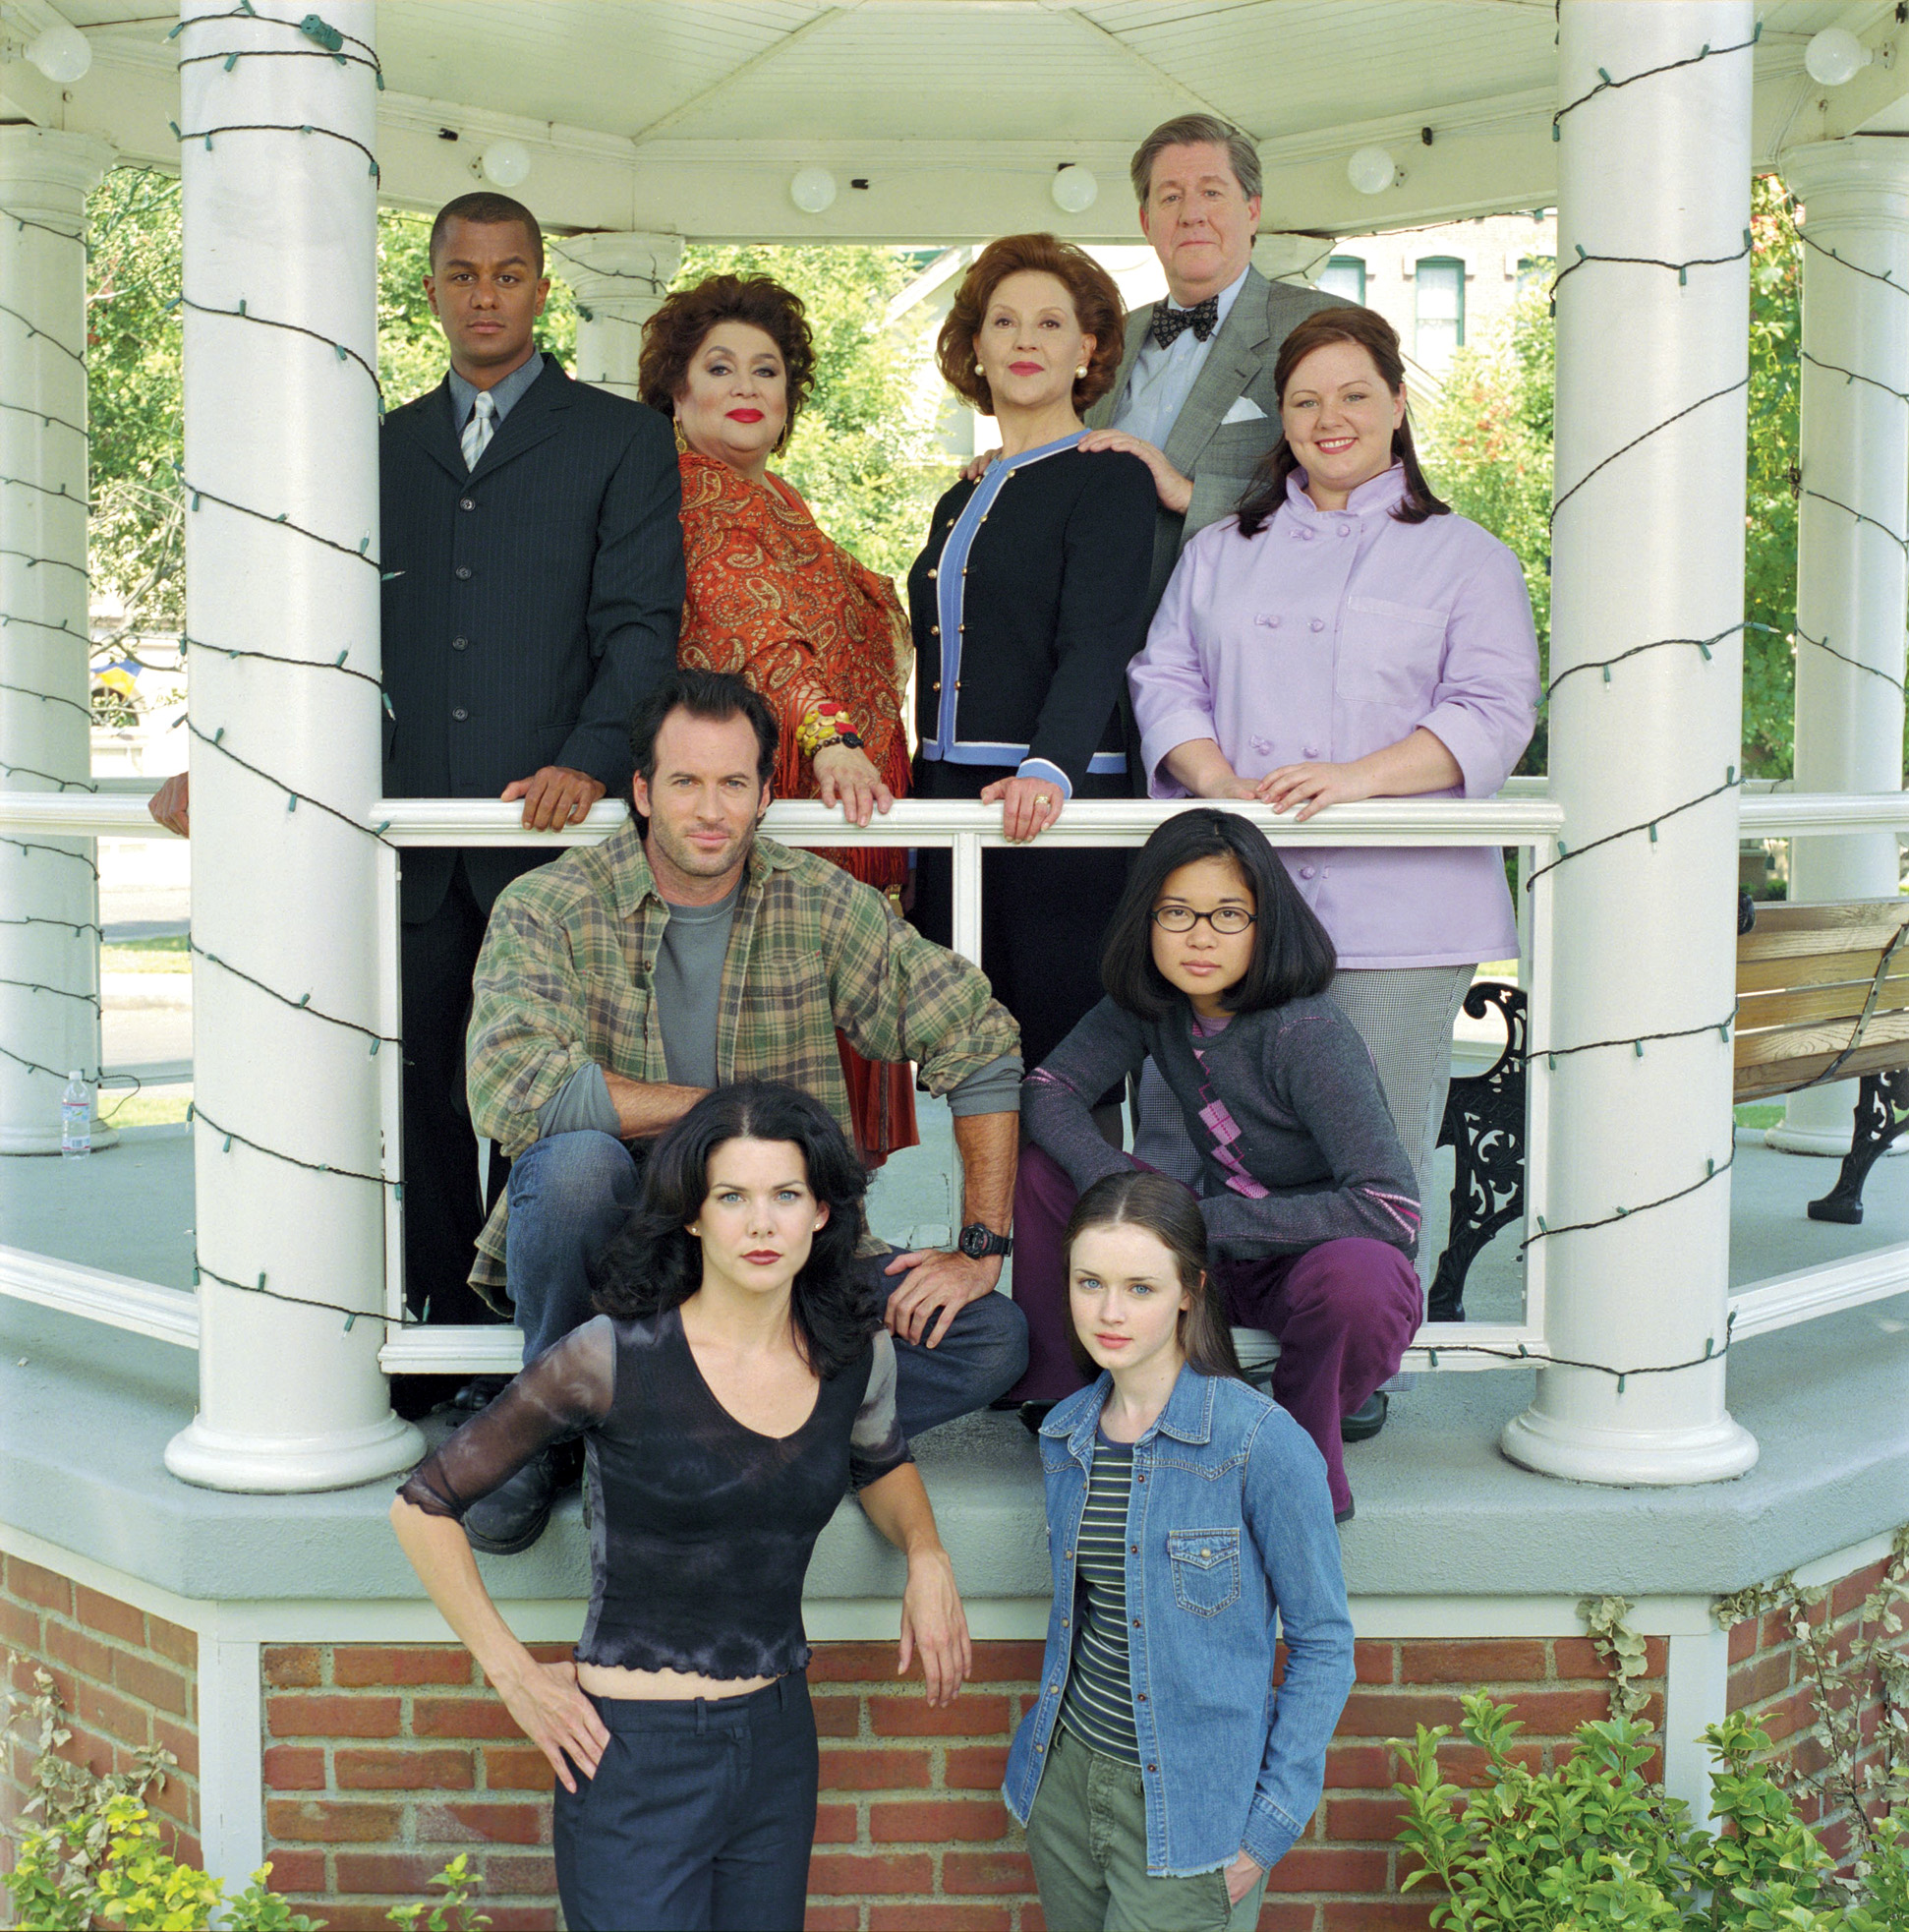 GILMORE GIRLS, Top row, from left: Yanic Truesdale, Liz Torres, Kelly Bishop, Edward Herrmann, Melissa McCarthy. Middle row, from left: Scott Patterson, Keiko Agena. Bottom row, from left: Lauren Graham, Alexis Bledel. (Season 1), 2000-2007,,Image: 98793817, License: Rights-managed, Restrictions: For usage credit please use; ©Warner Bros/Courtesy Everett Collection, Model Release: no, Credit line: Warner Bros Co / Everett / Profimedia